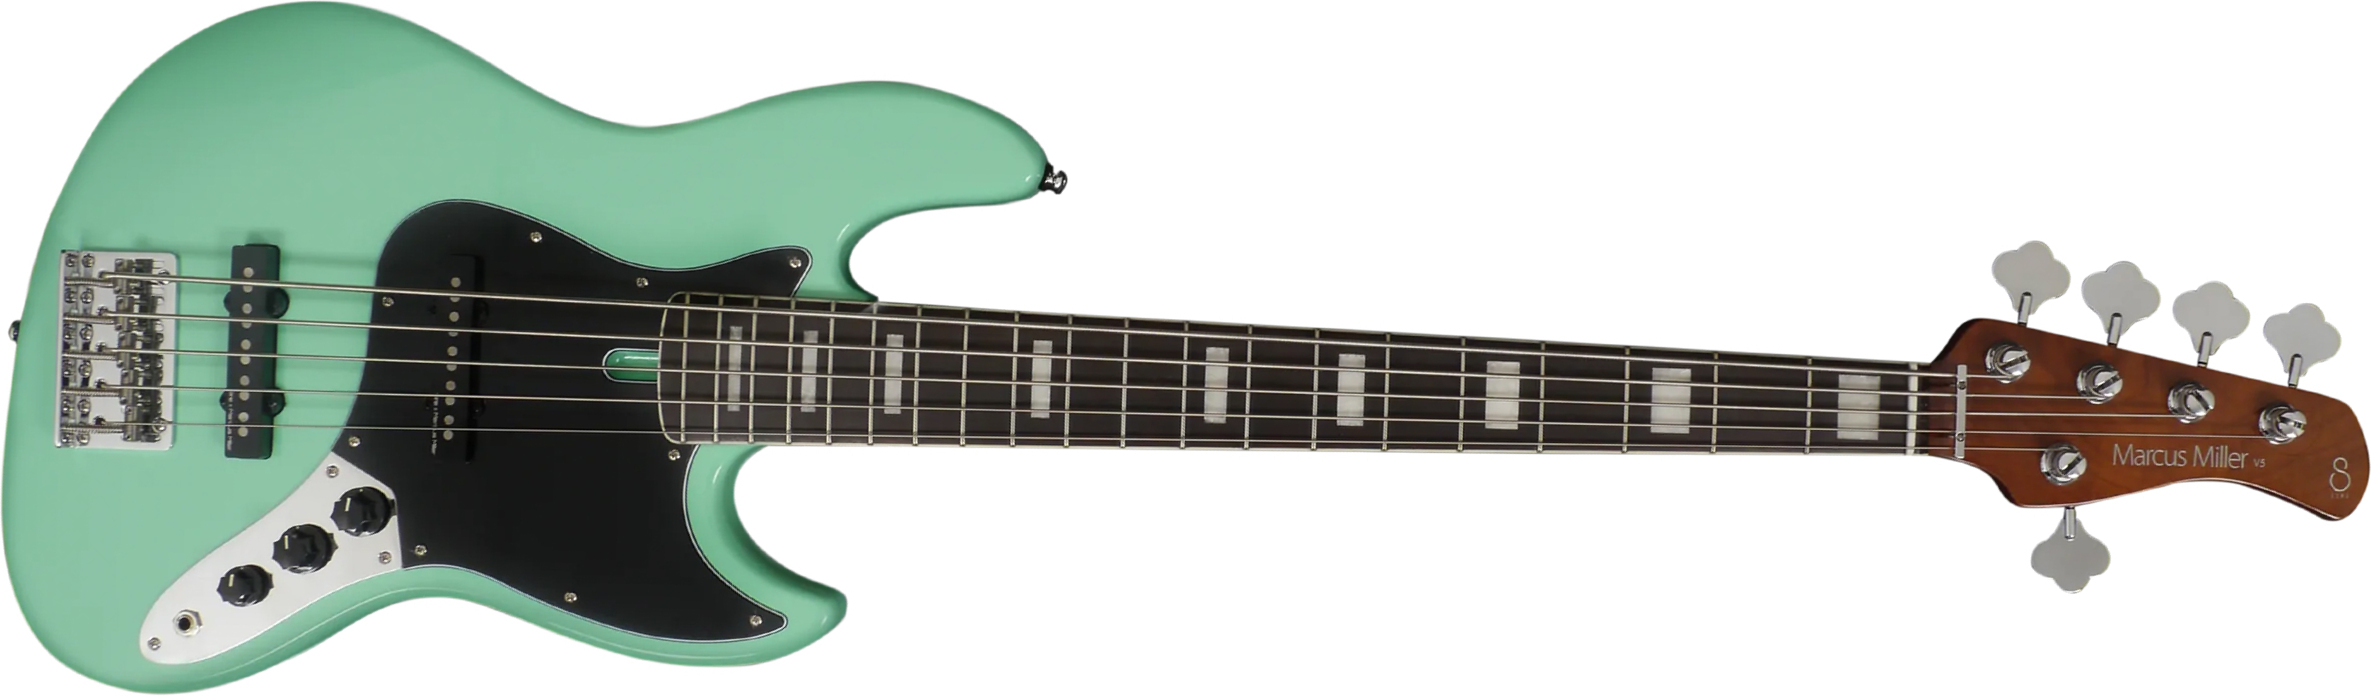 Marcus Miller V5r 5st 5c Rw - Mild Green - Solidbody E-bass - Main picture